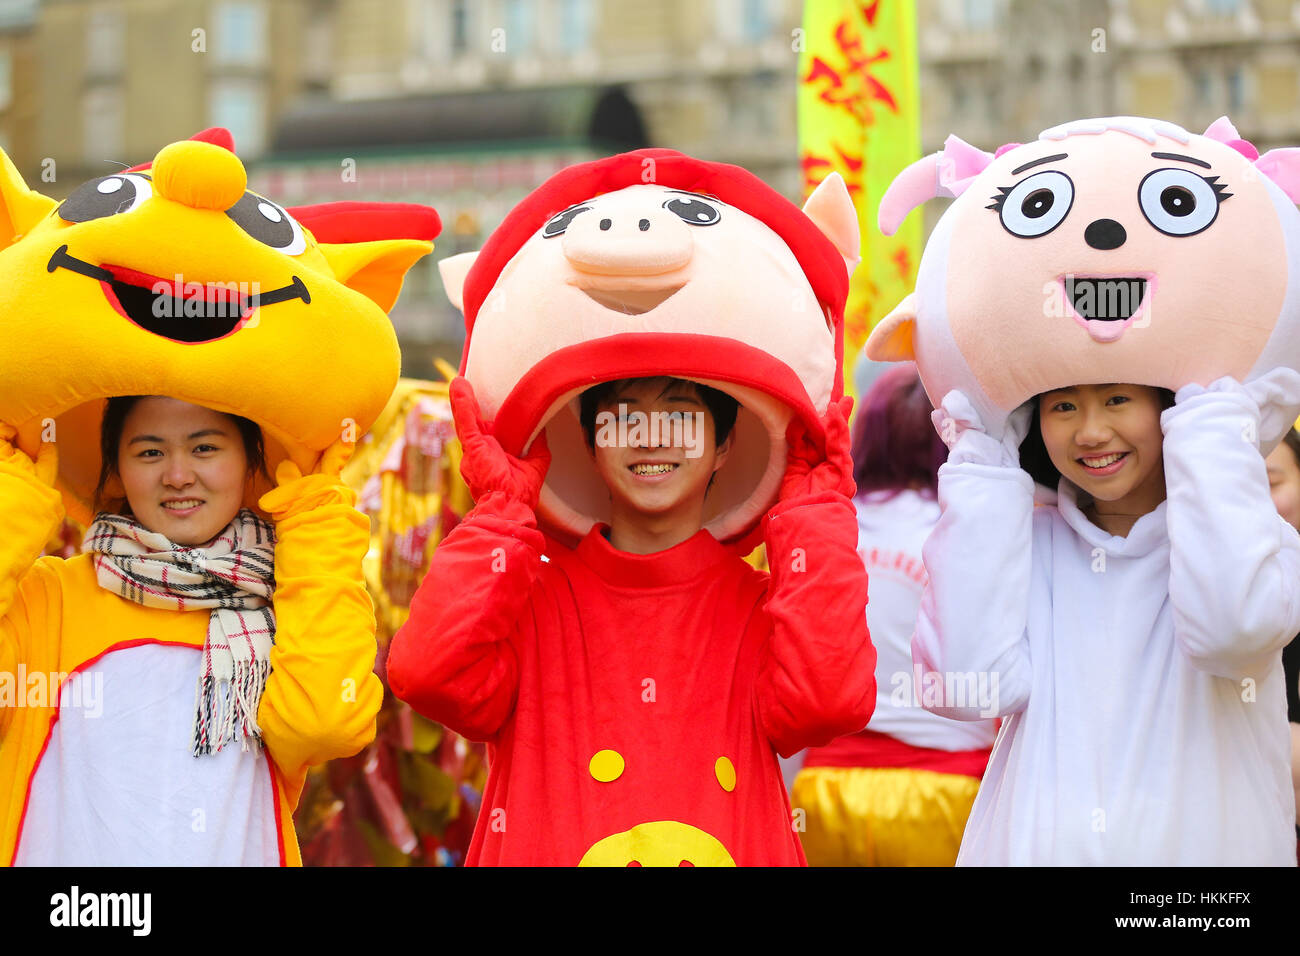 Central London, UK. 29th Jan, 2017. Costumed performers take part in the Chinese New Year Parade in central London, along Charing Cross Road and Chinatown, with further celebrations in Trafalgar Square to celebrate the Year of Rooster, the biggest celebration outside of Asia. The event is organised by London Chinatown Chinese Association. Credit: Dinendra Haria/Alamy Live News Stock Photo